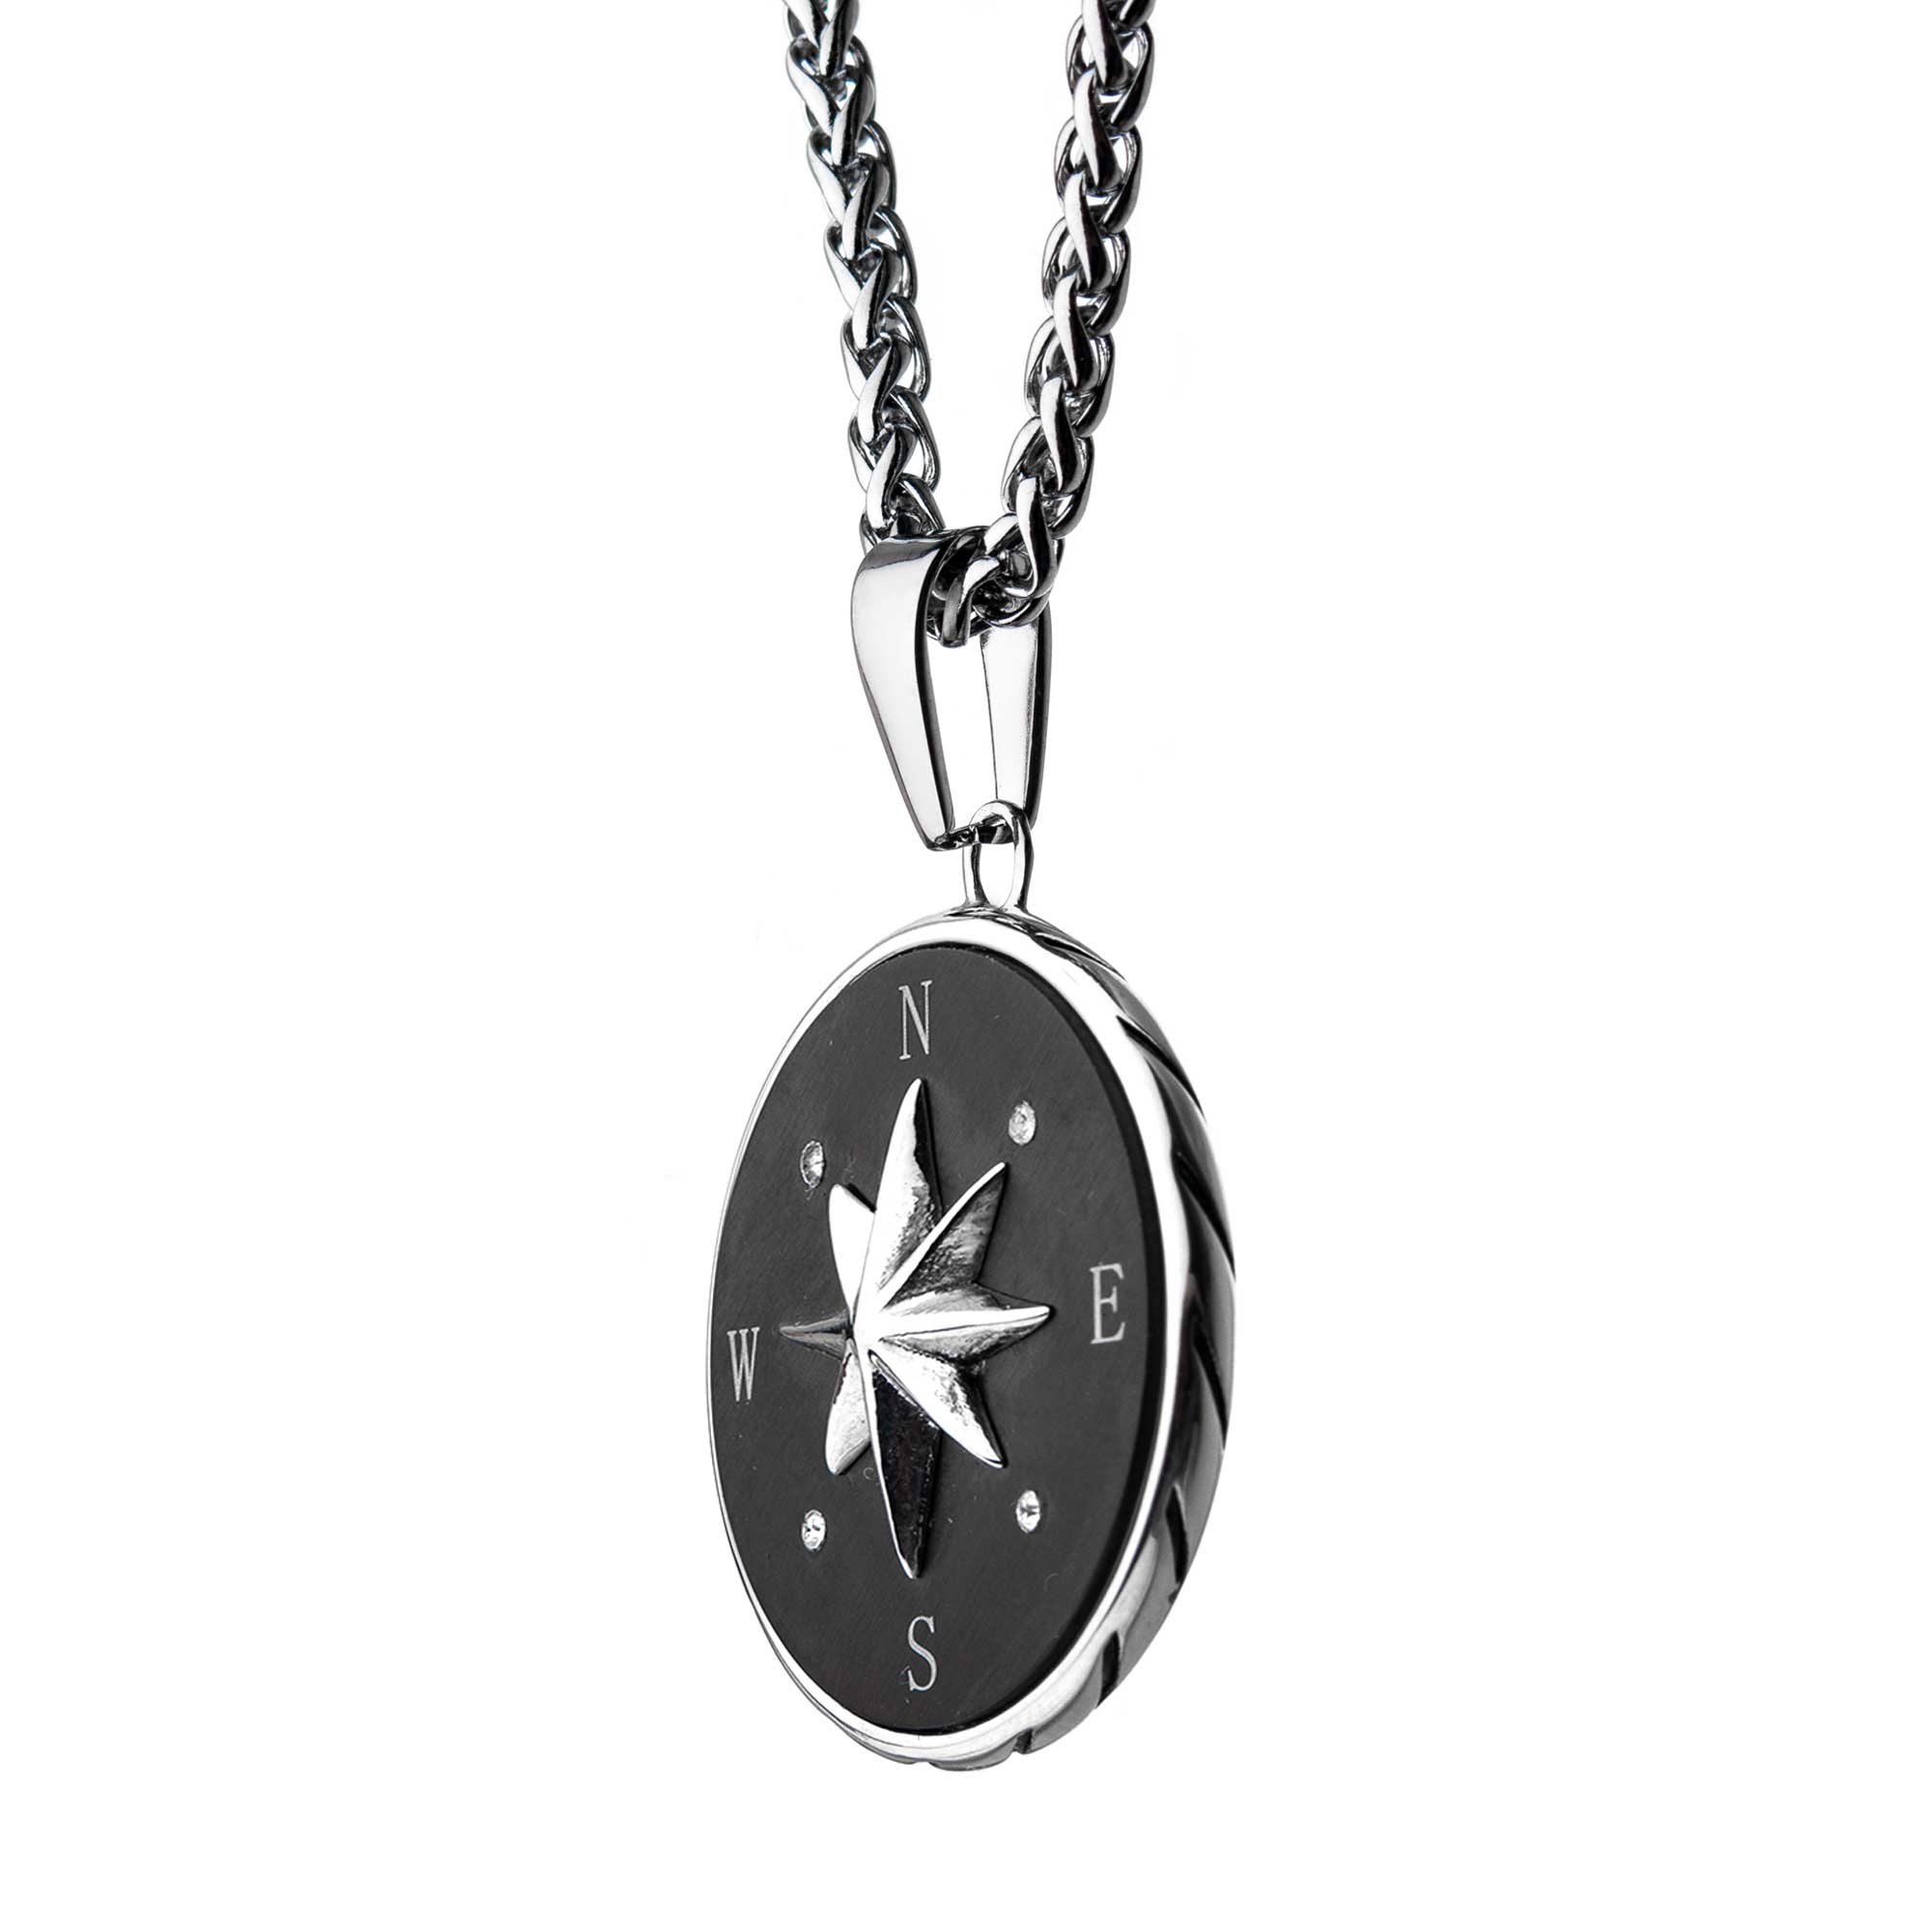 Stainless Steel and Black Plated Compass Pendant with Chain Image 3 Lewis Jewelers, Inc. Ansonia, CT